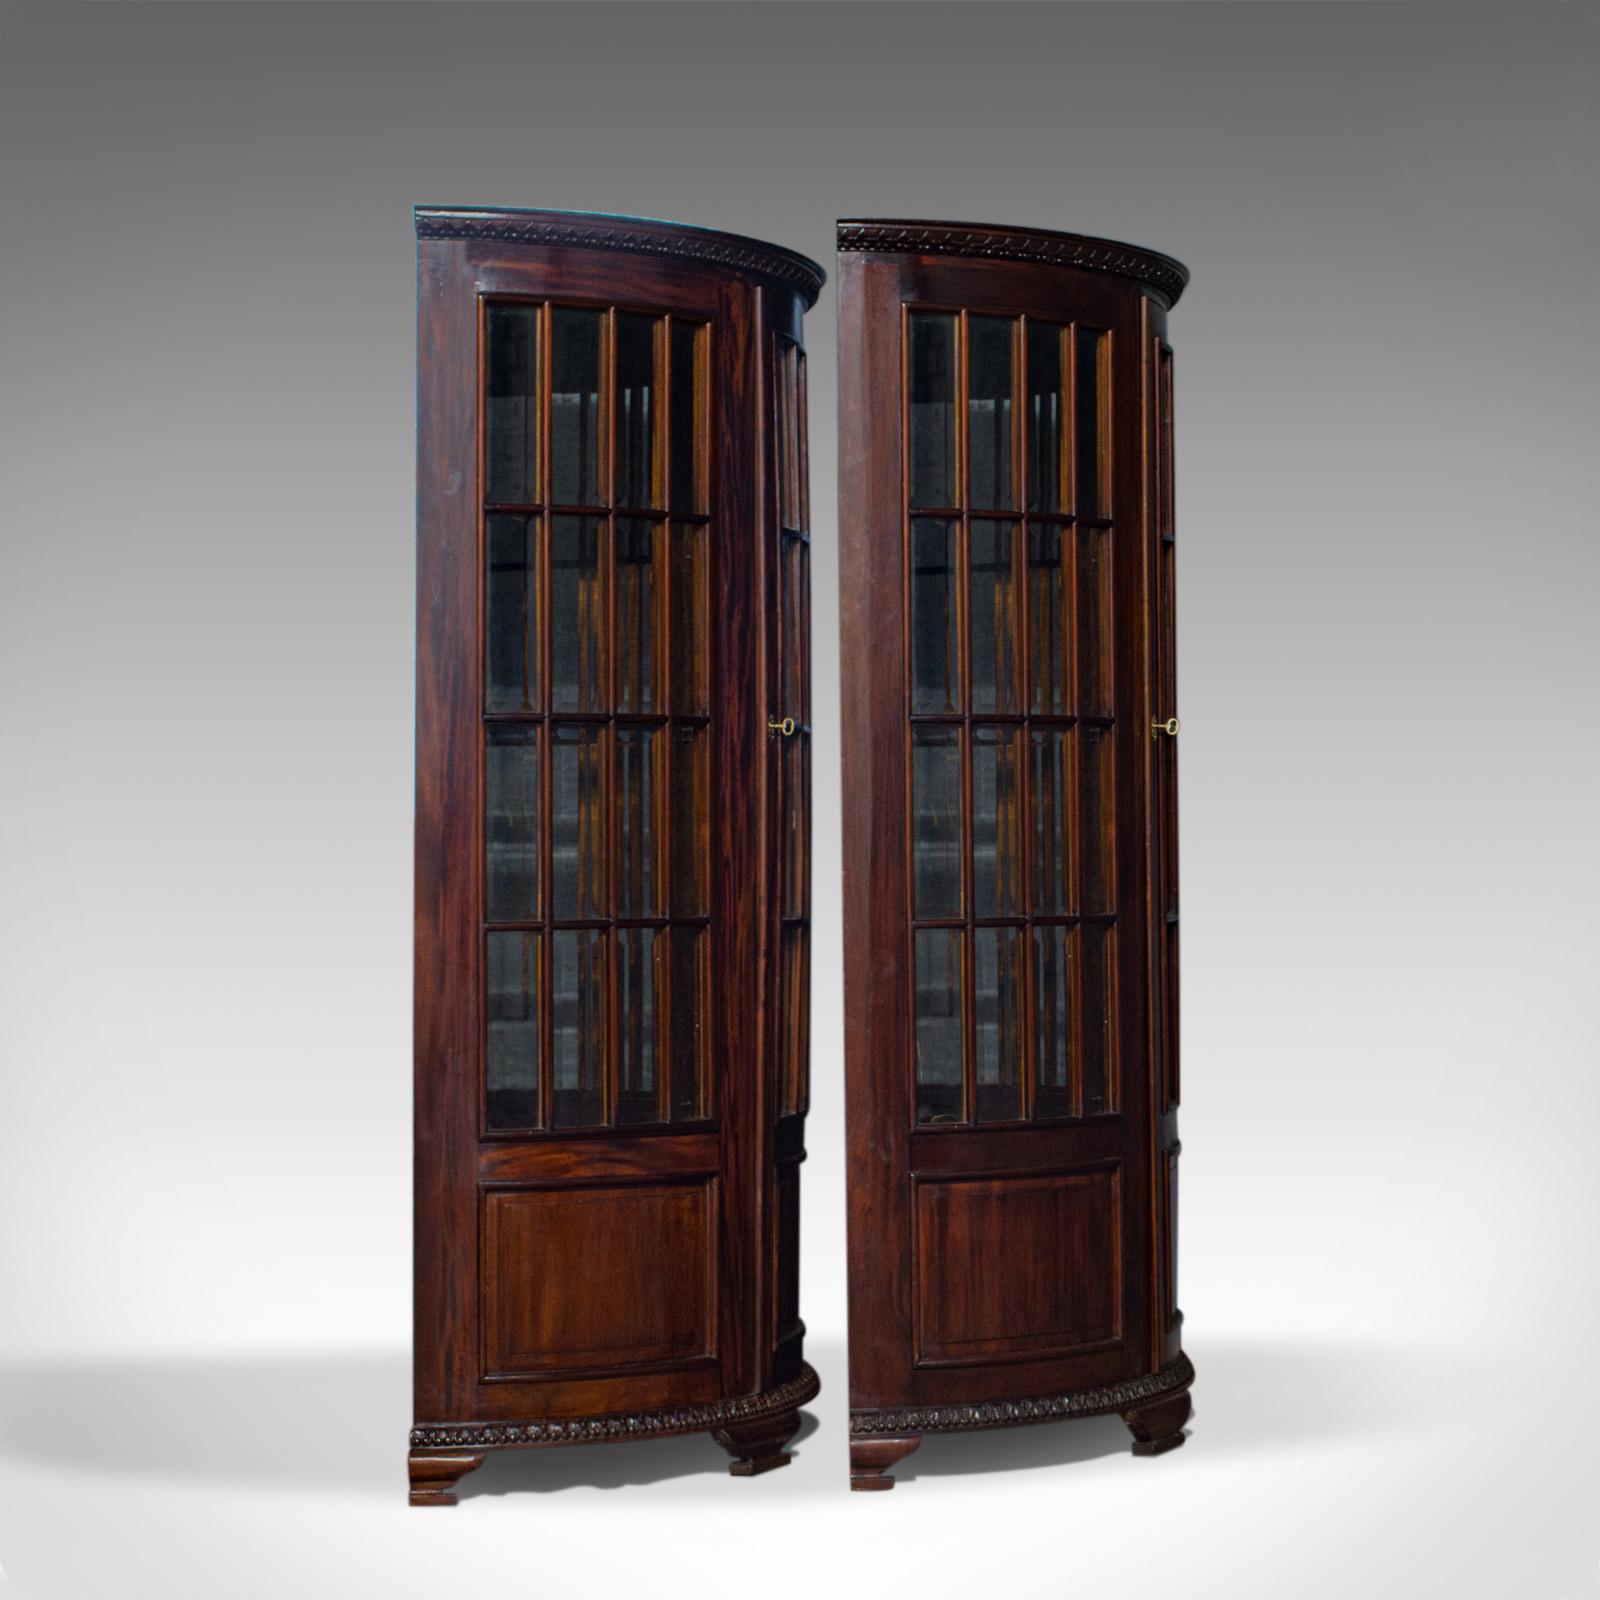 European Vintage Pair of Demilune Display Cabinets, Mahogany, Bow-Front, Glazed